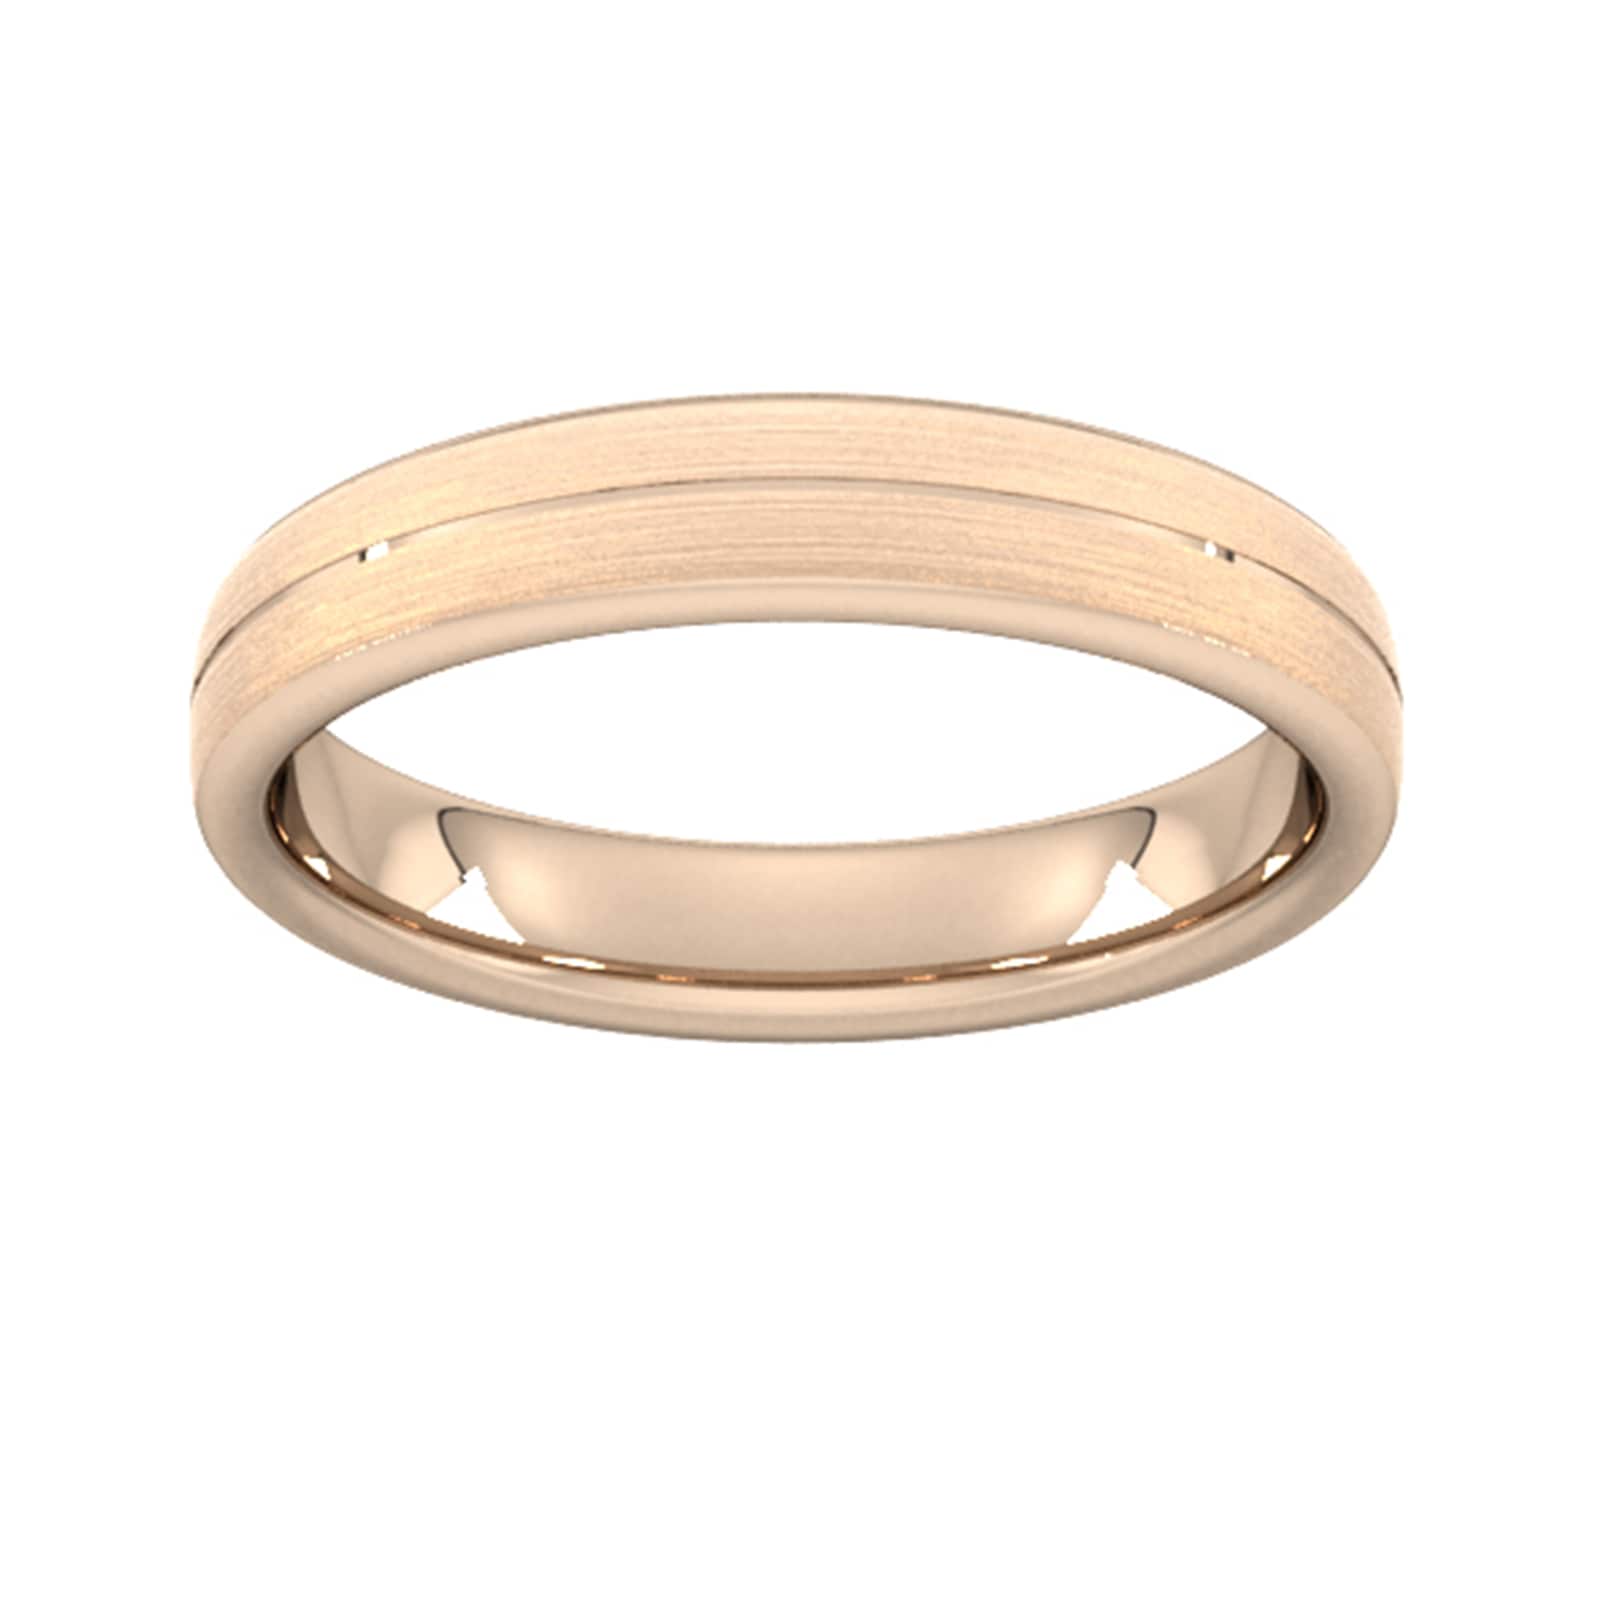 4mm D Shape Standard Centre Groove With Chamfered Edge Wedding Ring In 9 Carat Rose Gold - Ring Size P